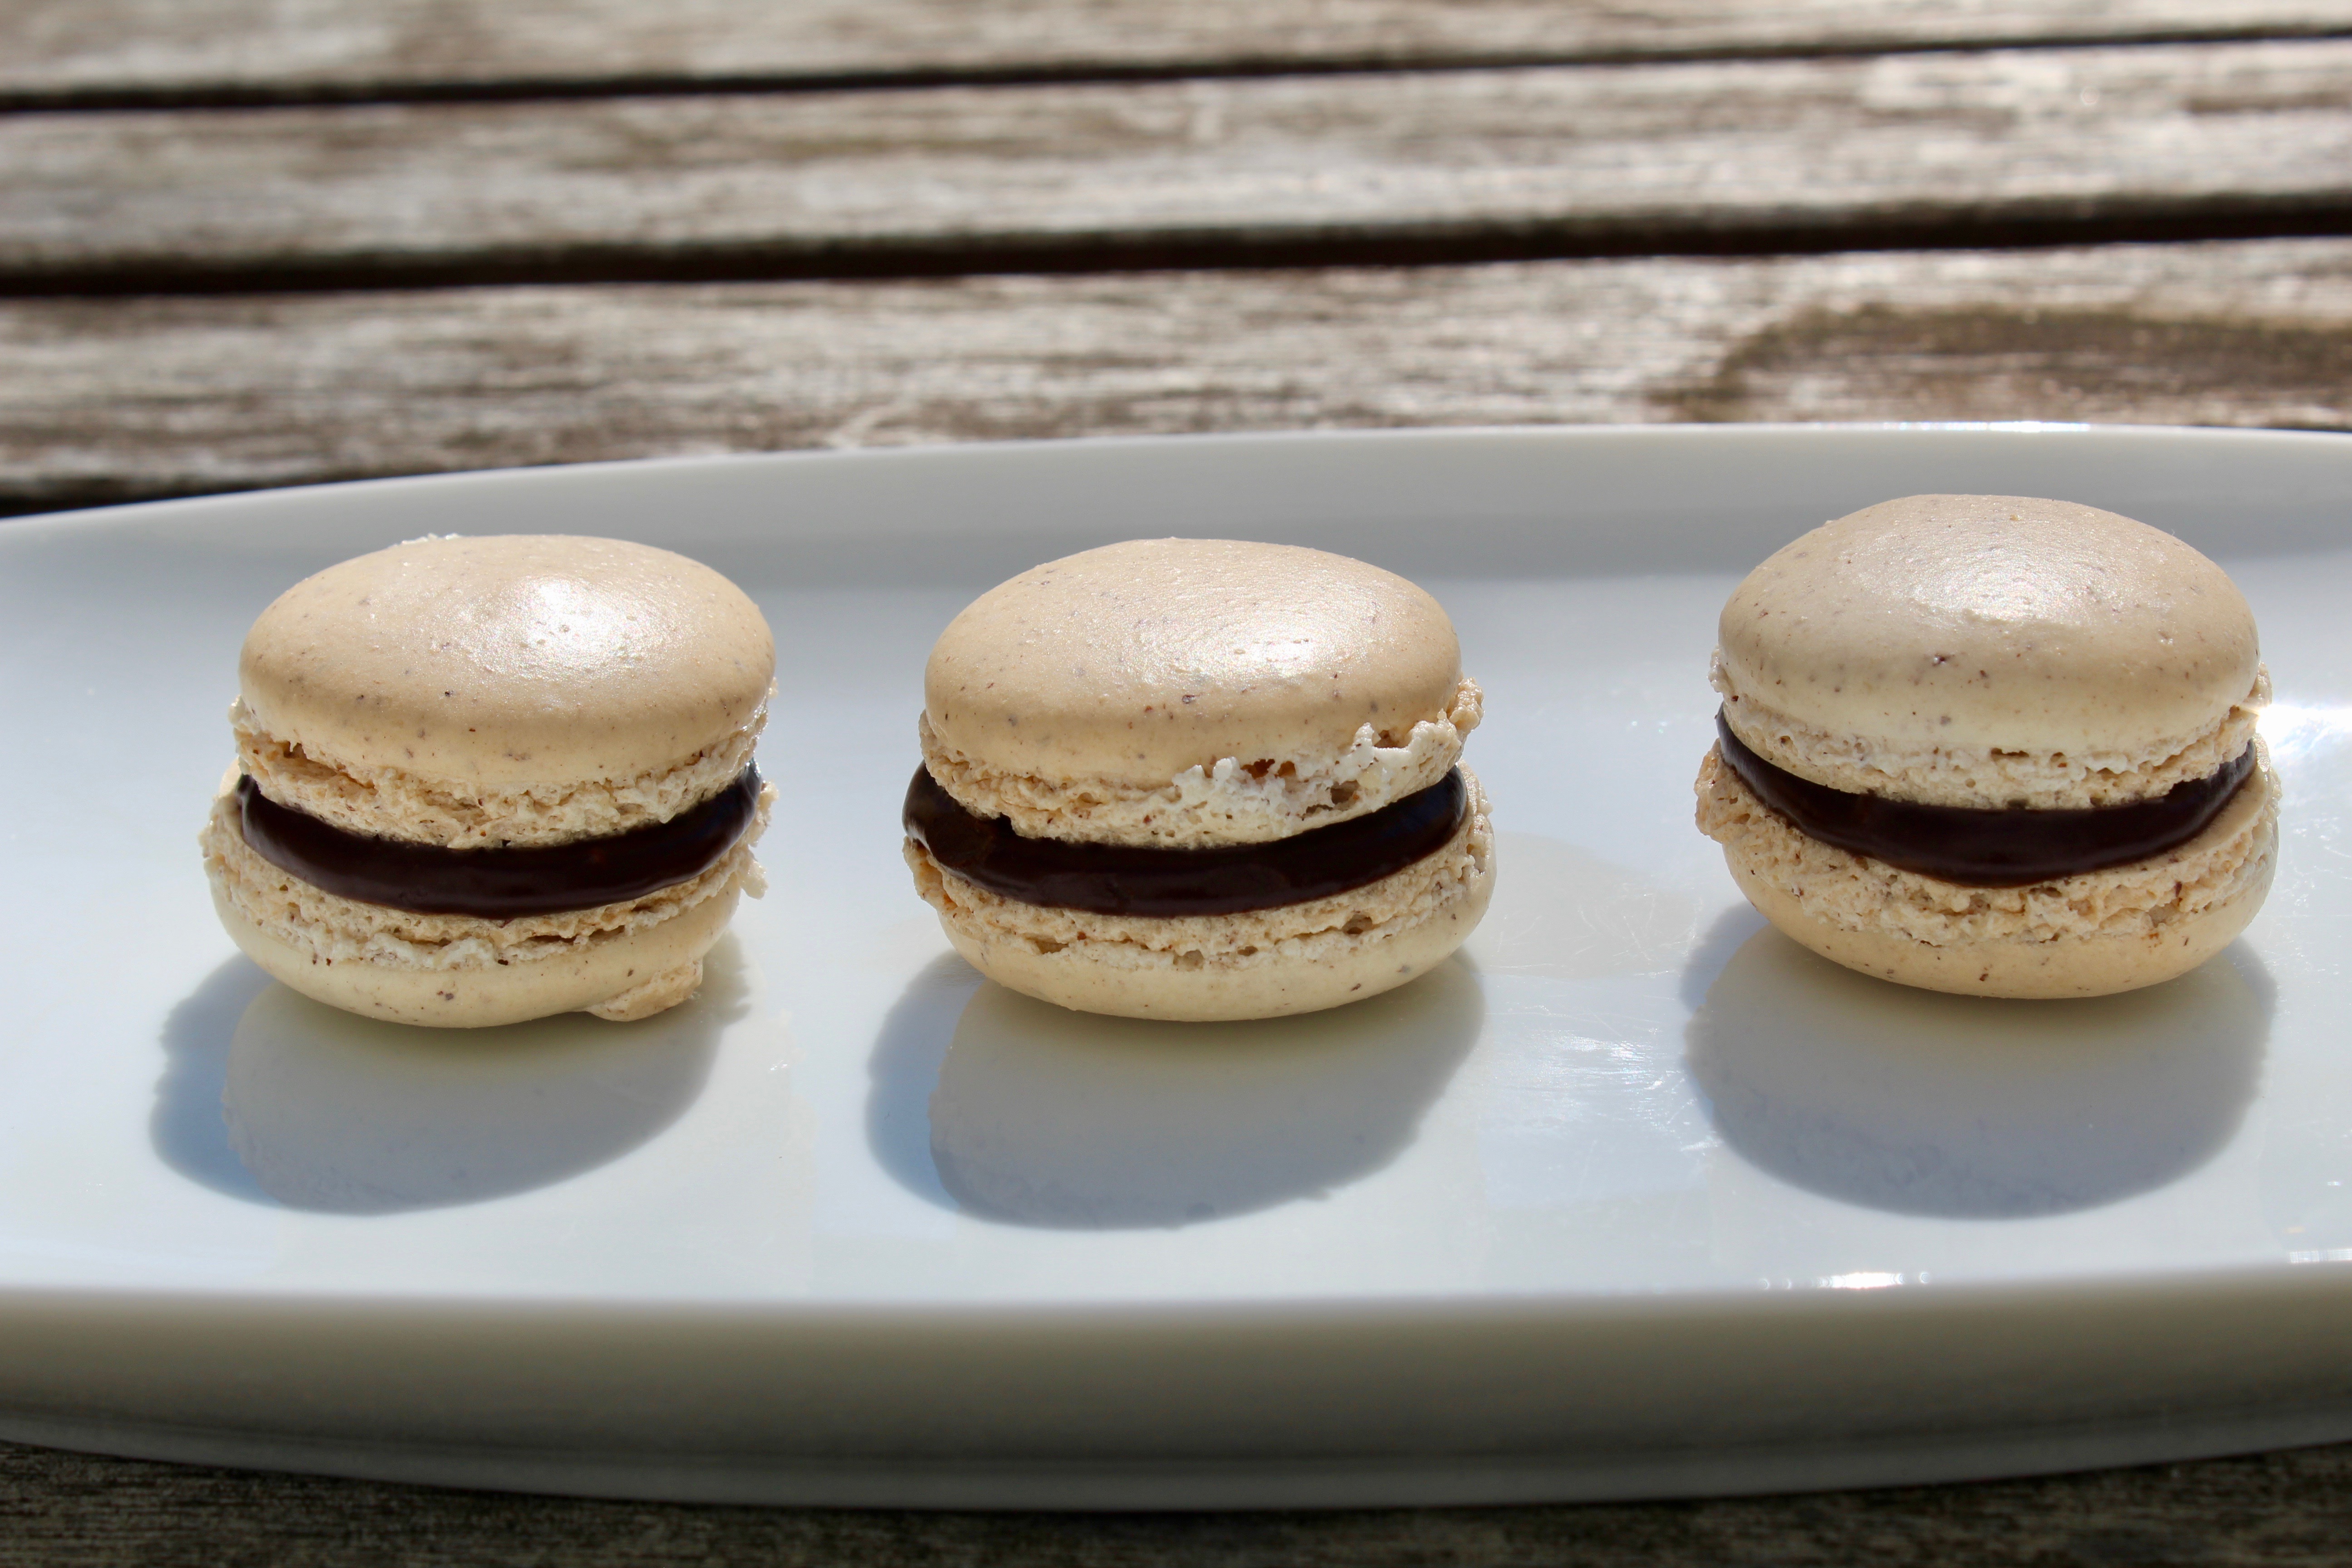 Seems reasonable that one person could eat three macarons, right?